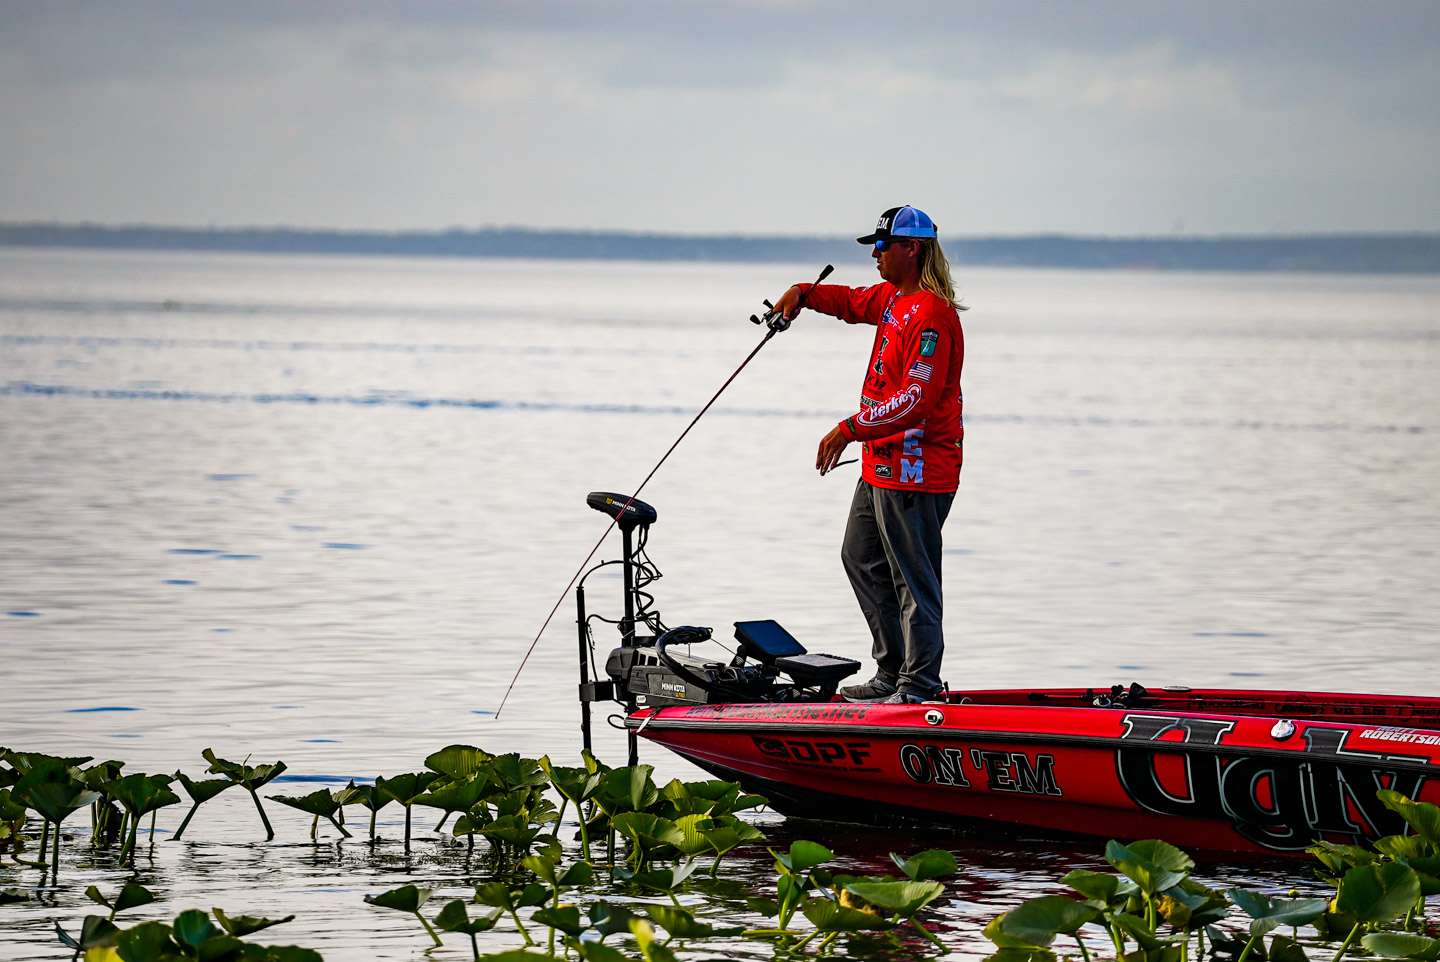 Robertson meticulously picked apart the lily pads, making short pitches and soaking his bait in an area for a long while.